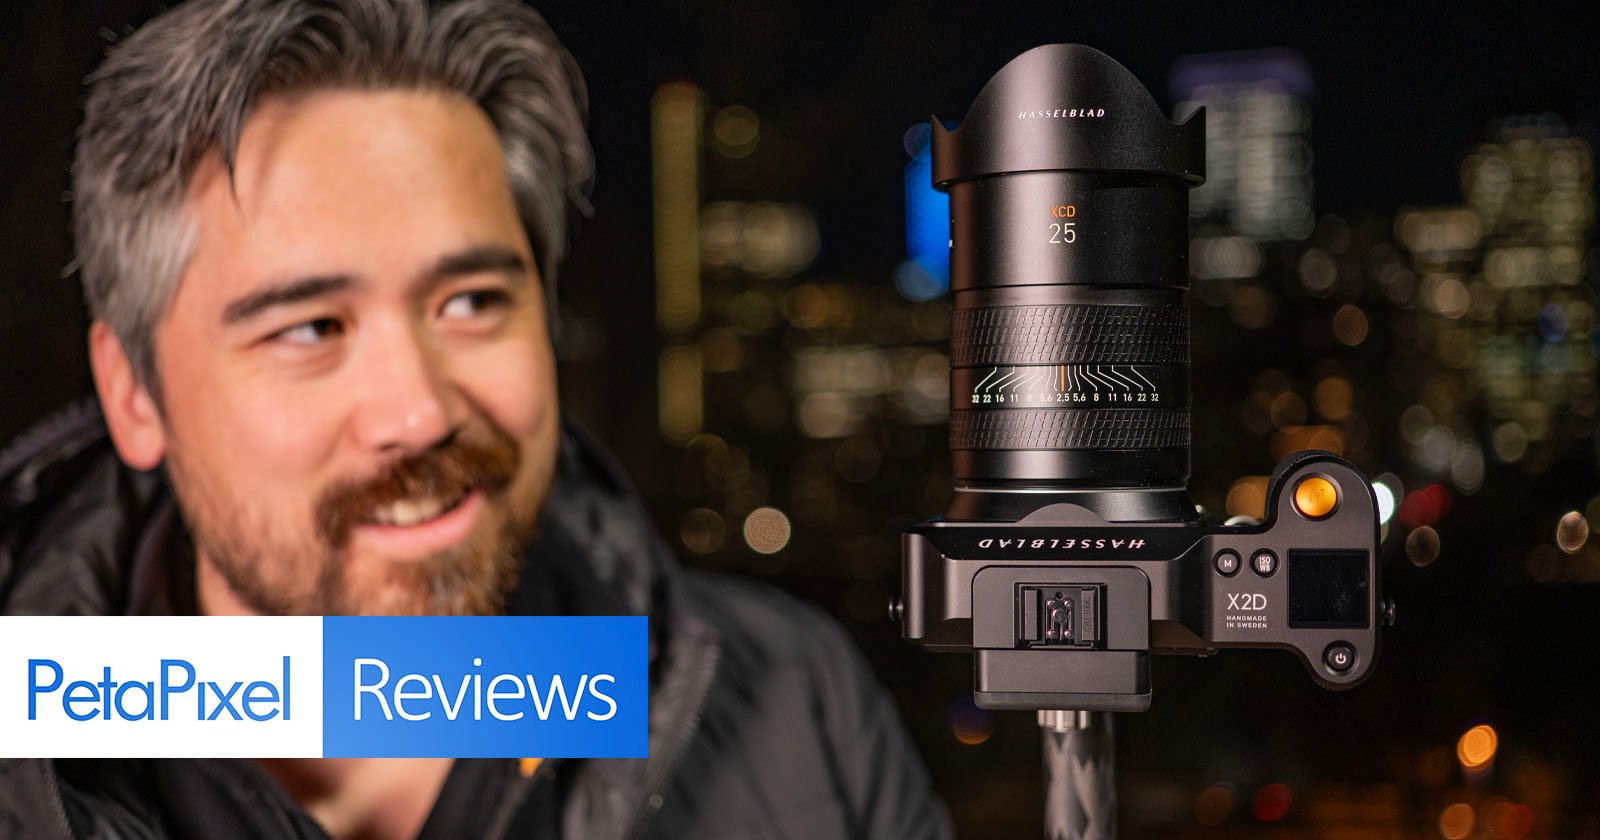 A man with a slight smile looks at a camera mounted on a tripod in the foreground, with a city's blurry lights in the background. the image includes a petapixel reviews label.